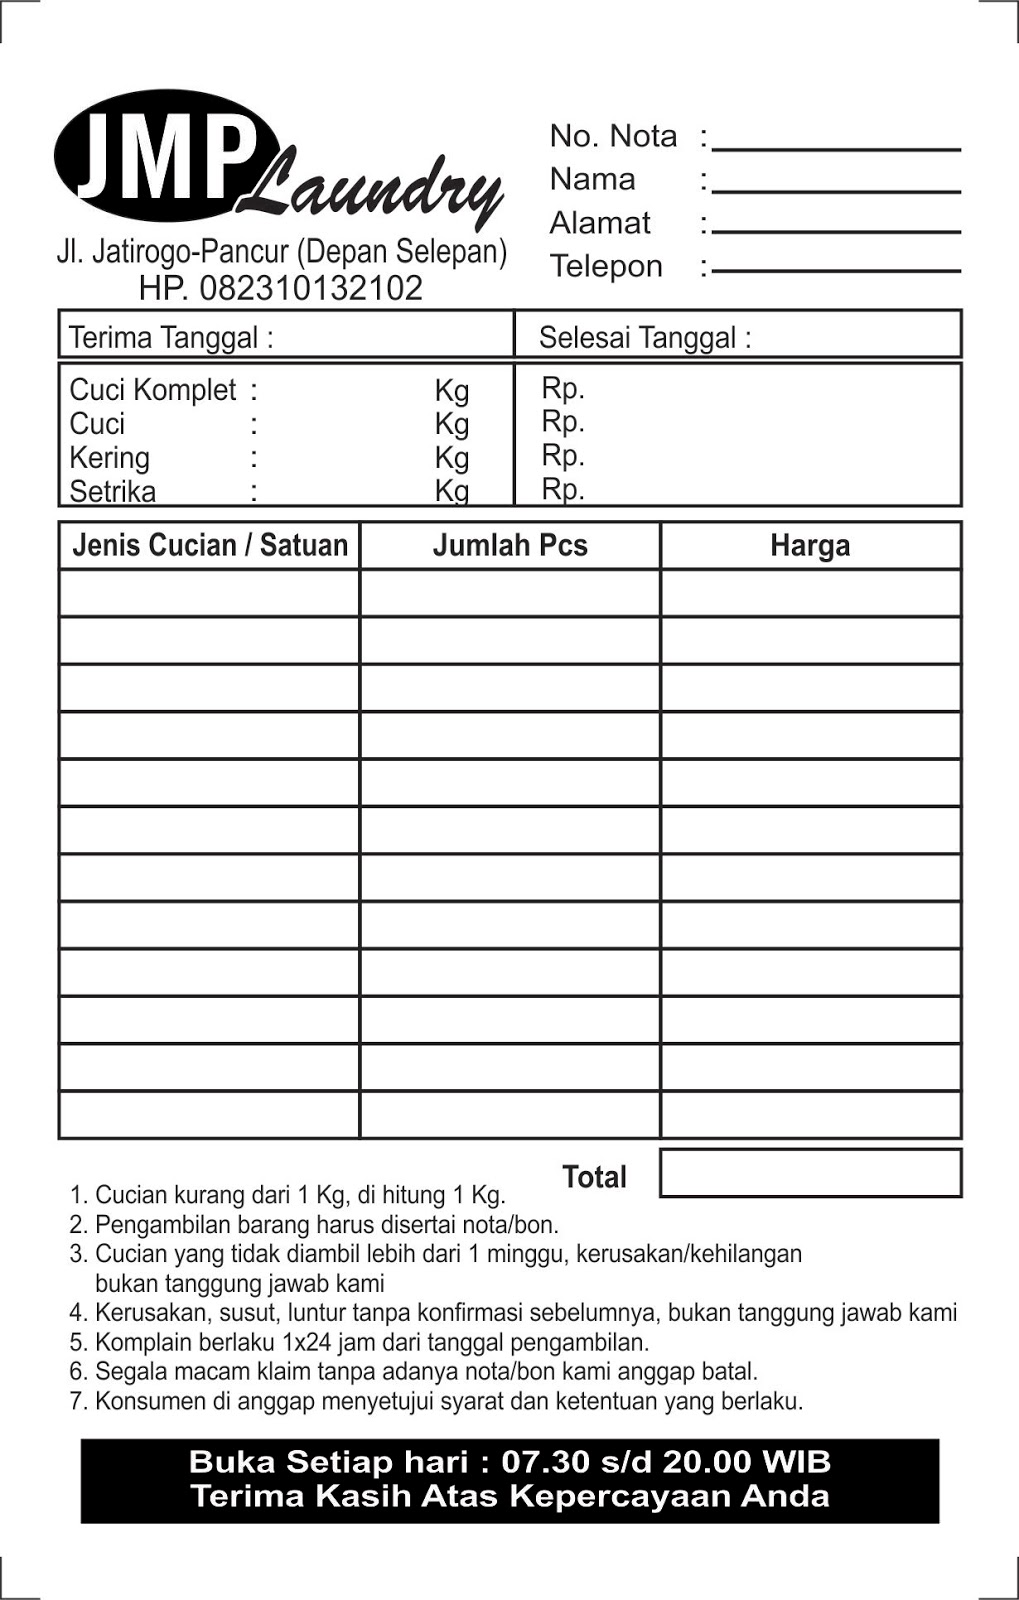 download-template-nota-format-cdr